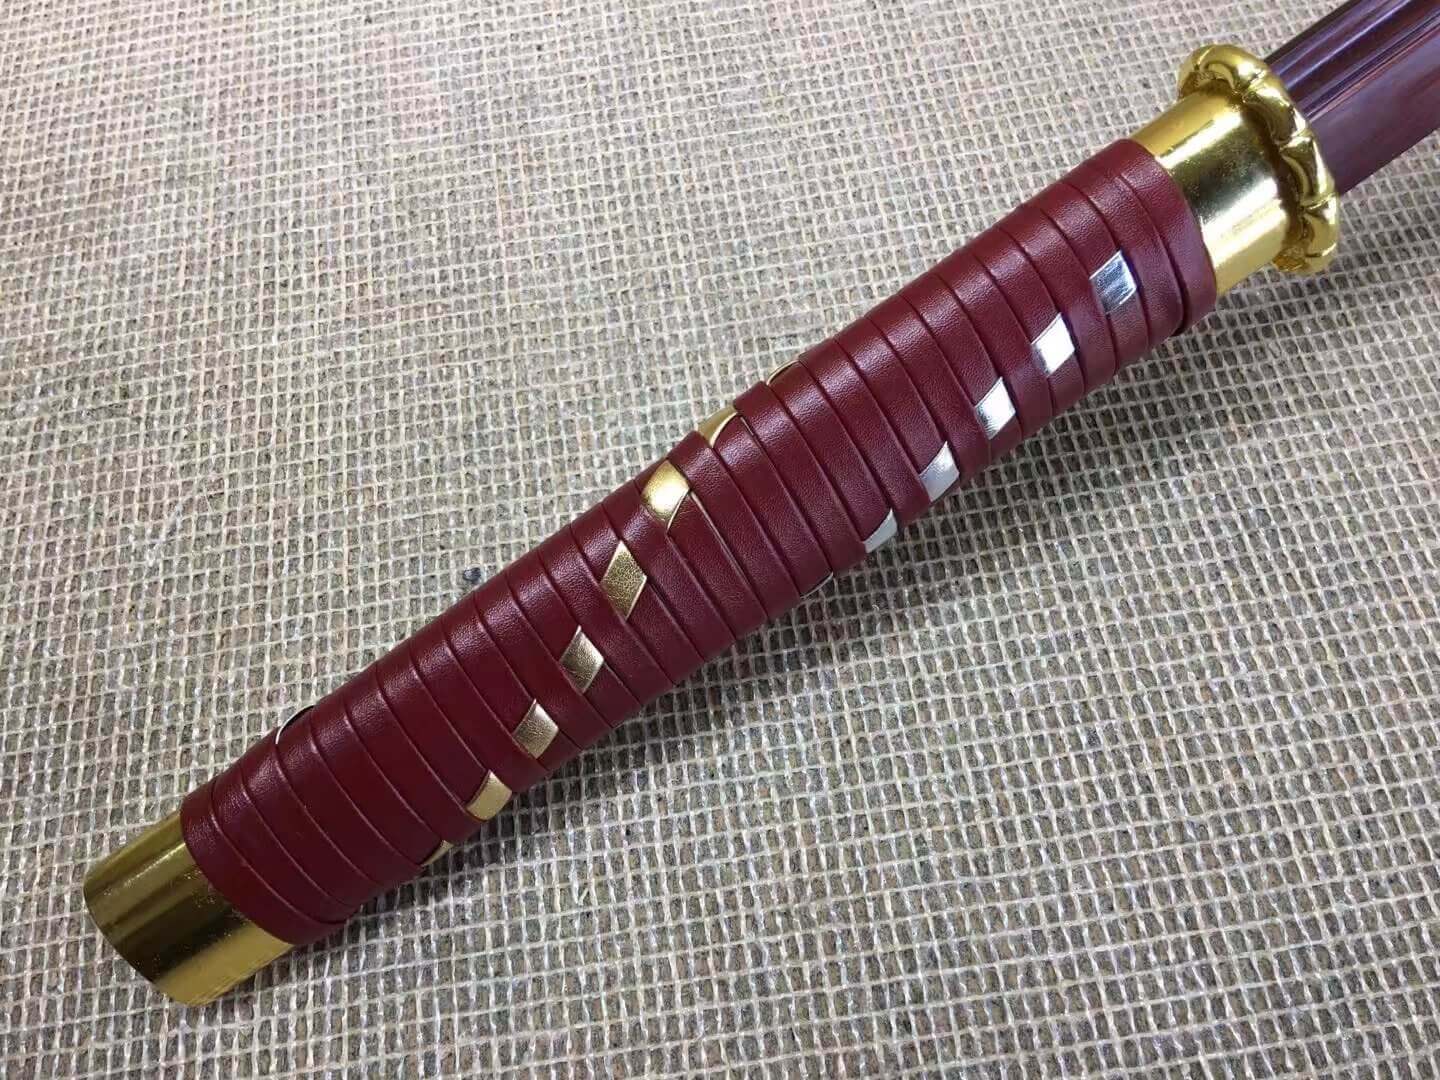 Horse chopping sword,High carbon steel red blade,Leather scabbard - Chinese sword shop